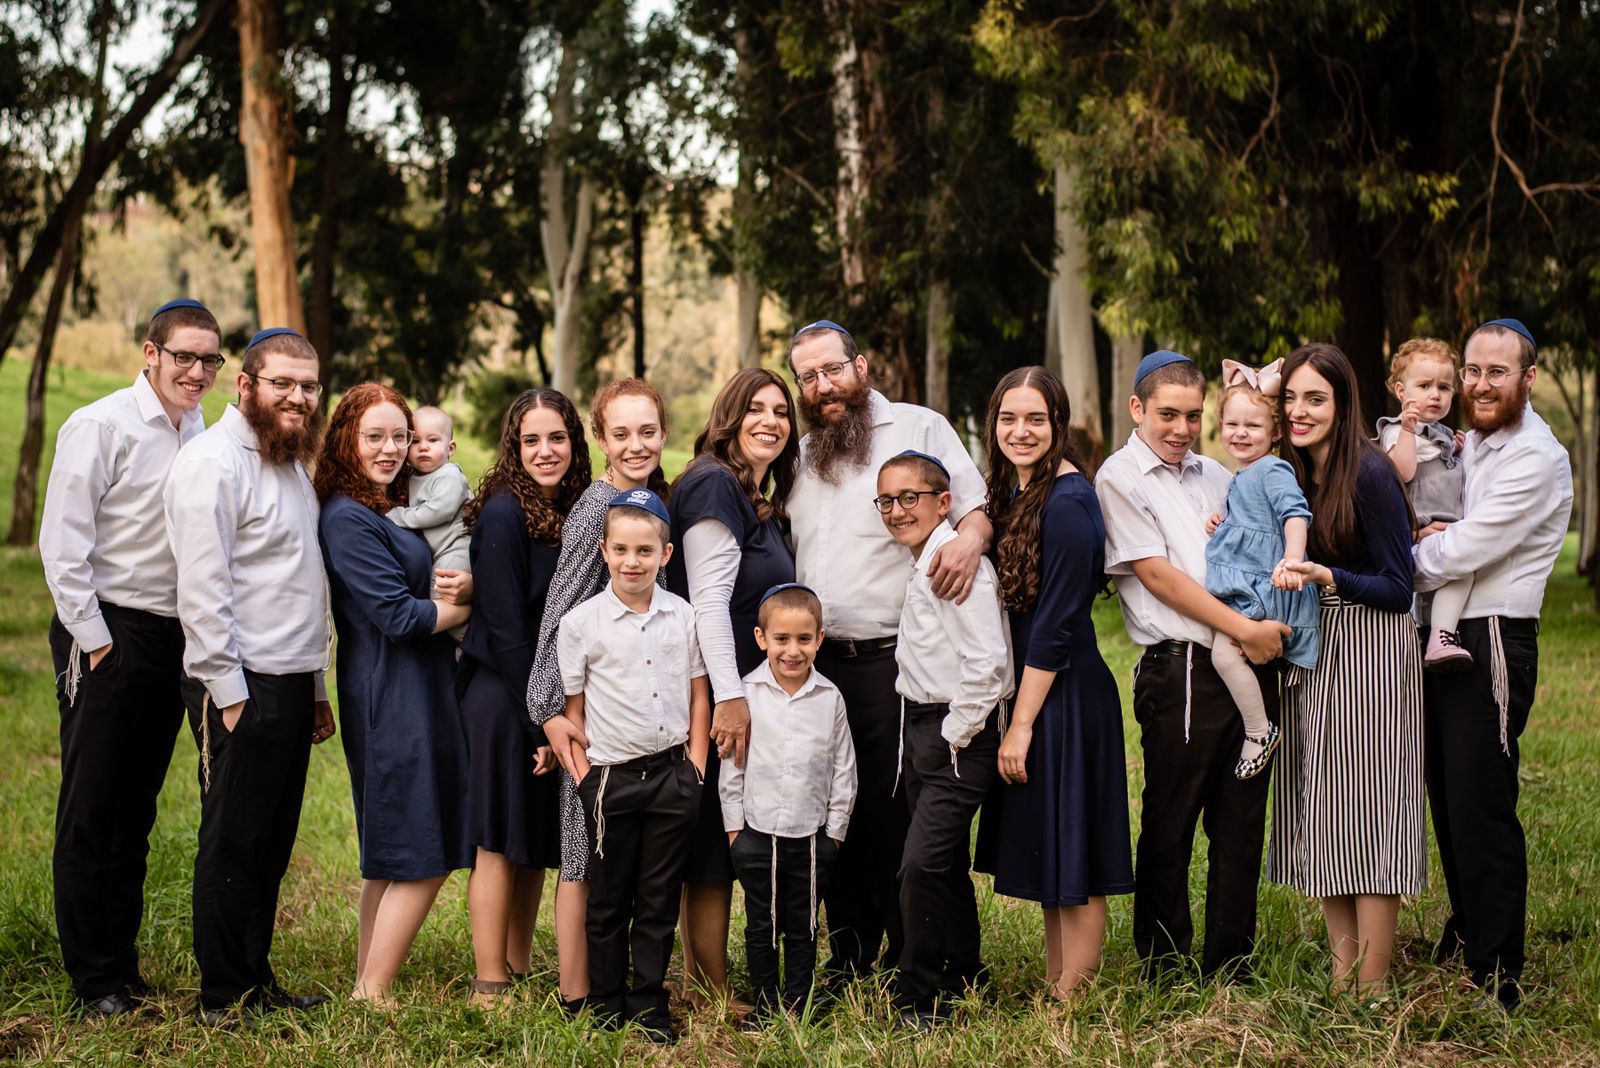 We’re not just a shul; we’re family